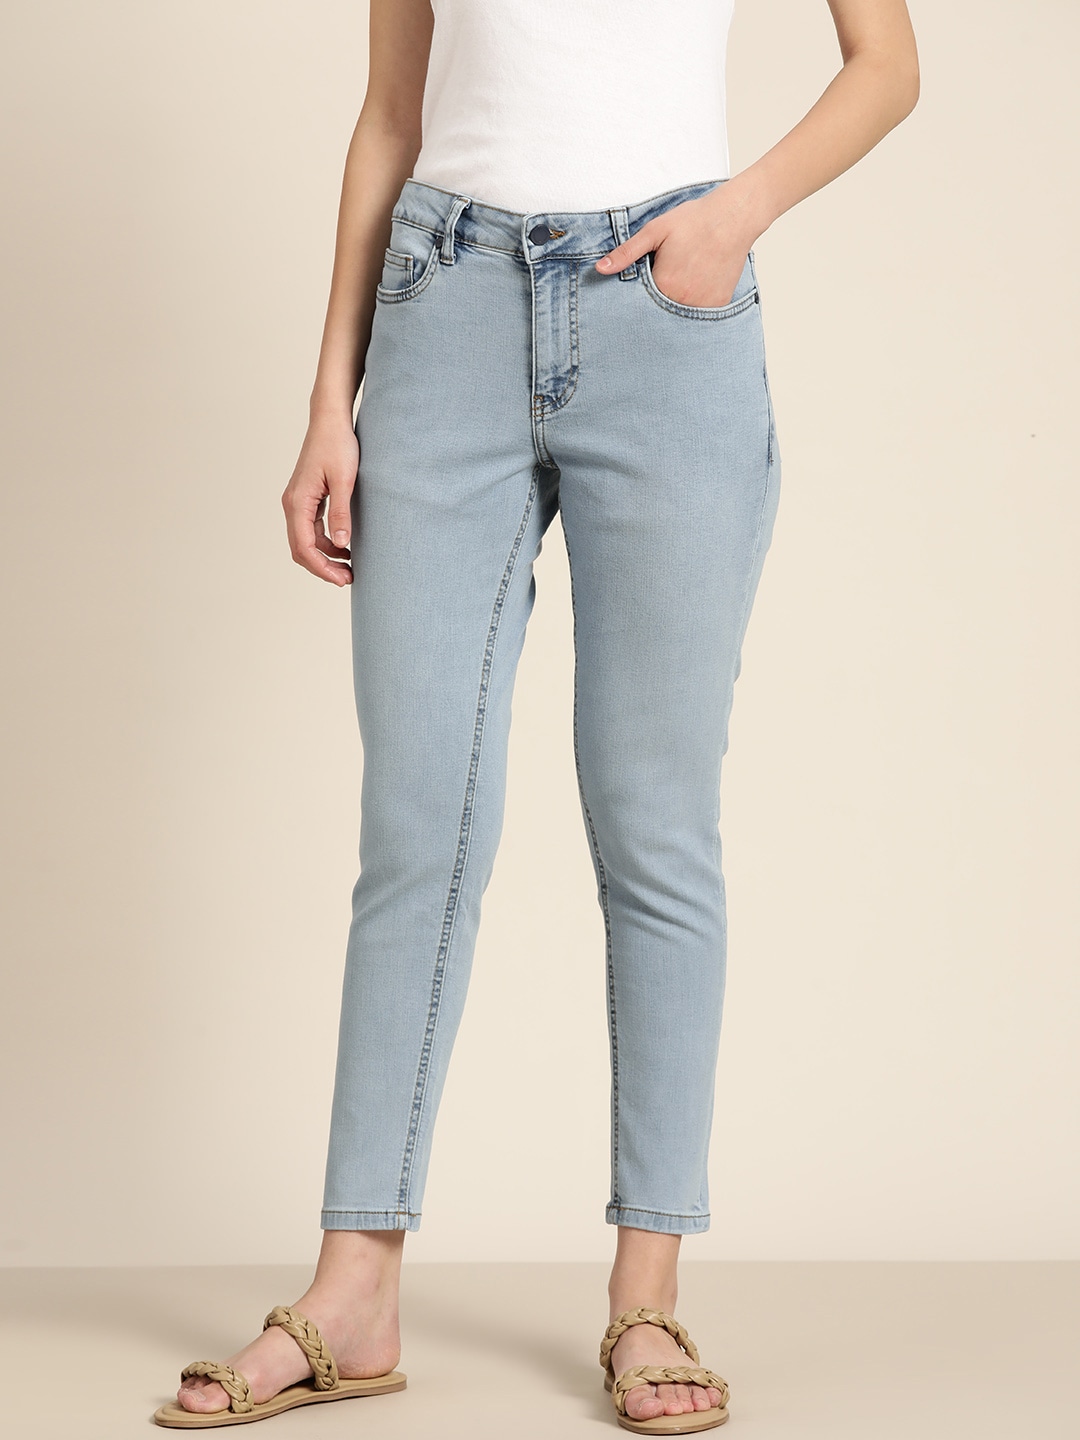 ether Women Jeans Starts from Rs. 224